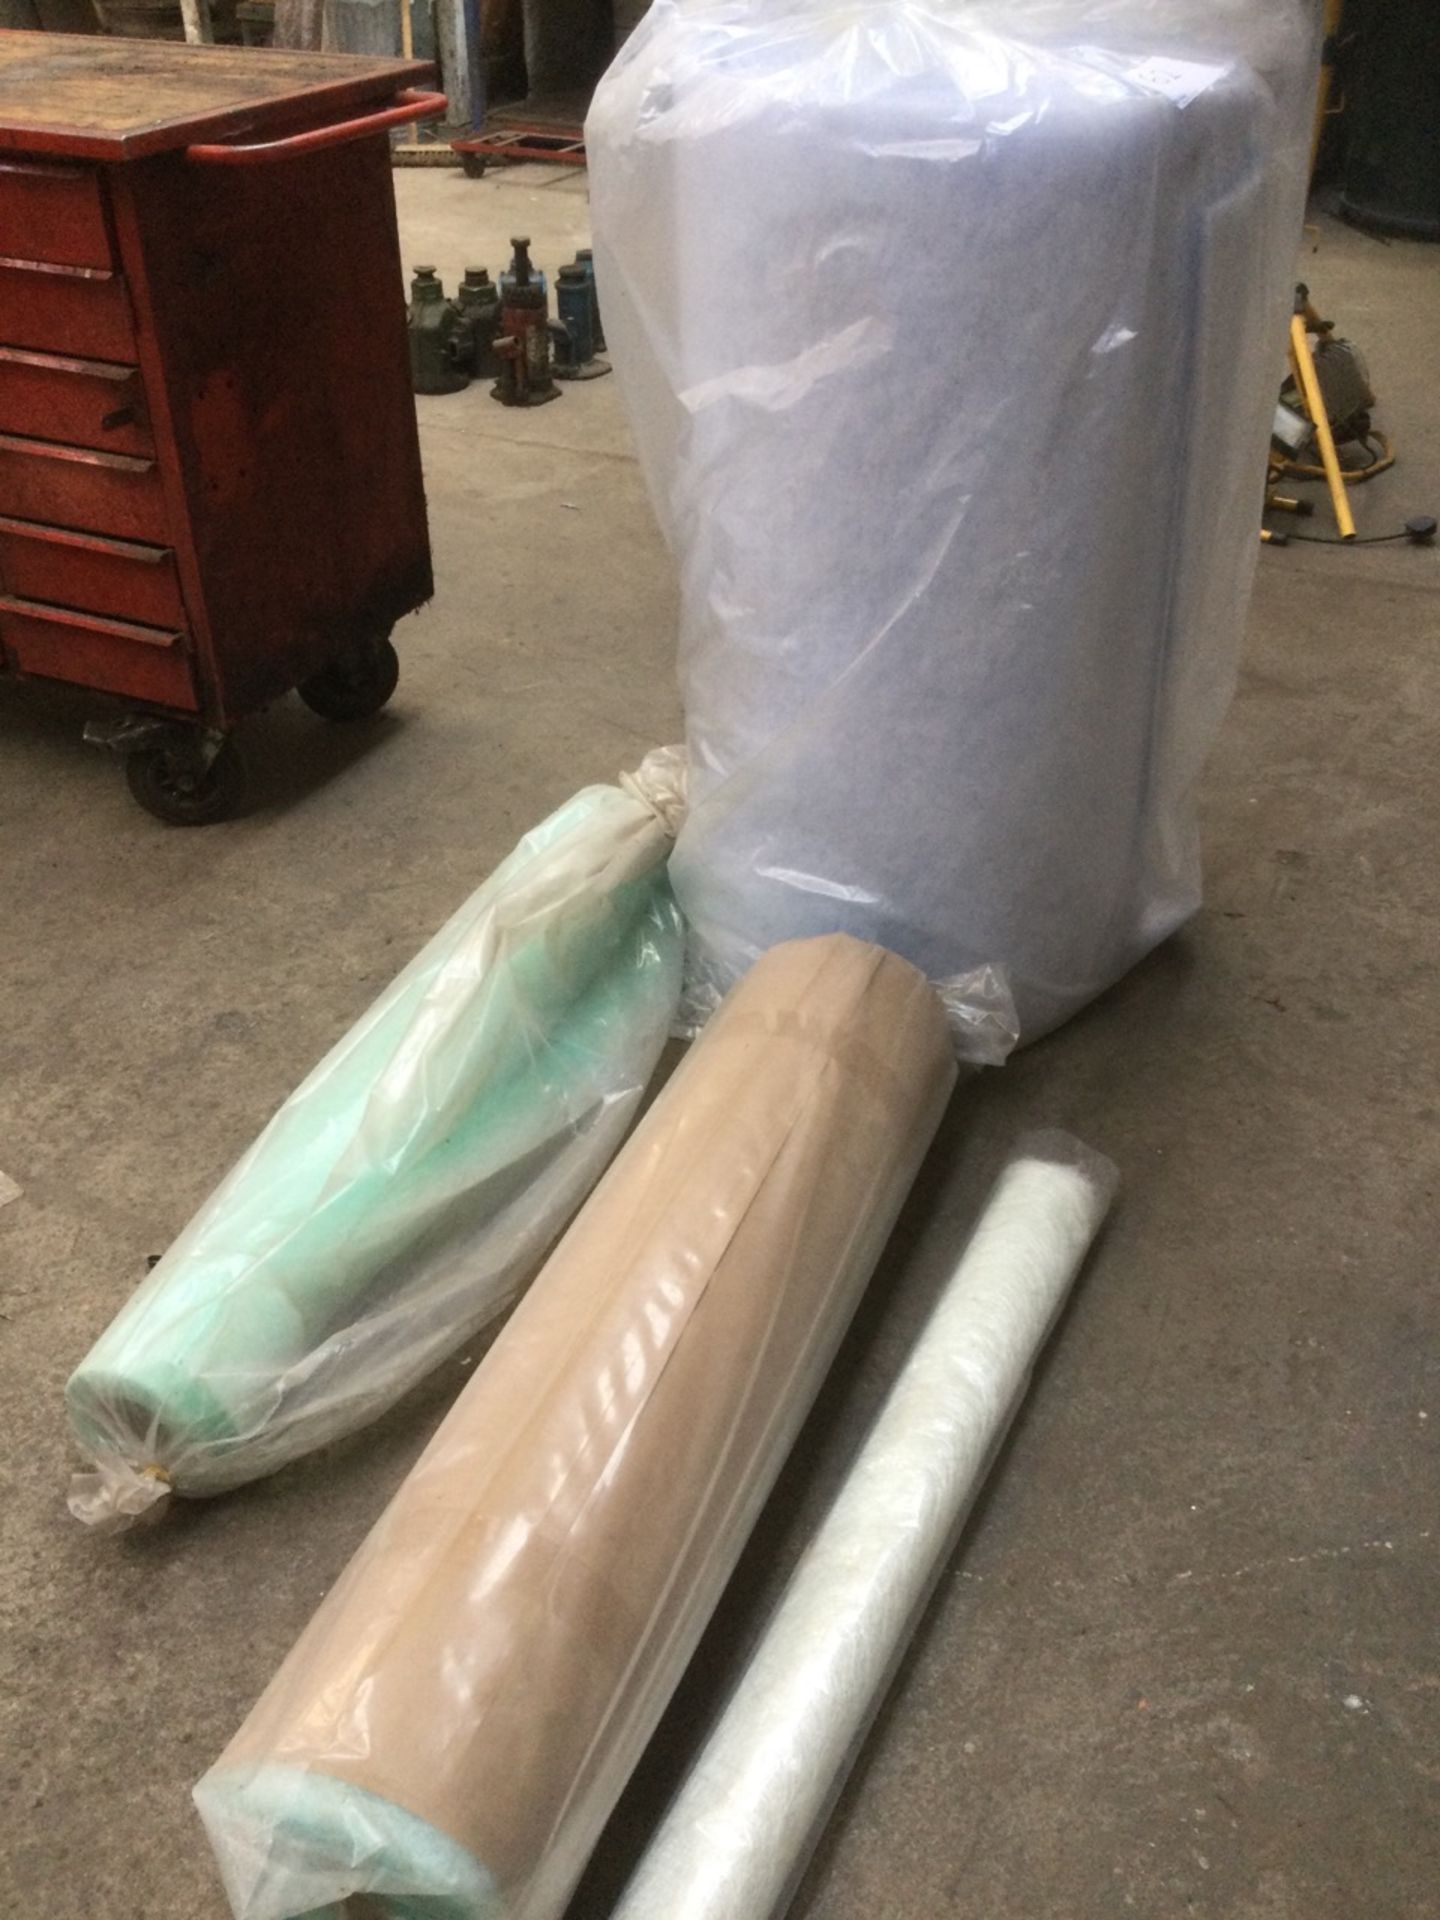 4: Miscellaneous Rolls Of Filter And Fibreglass